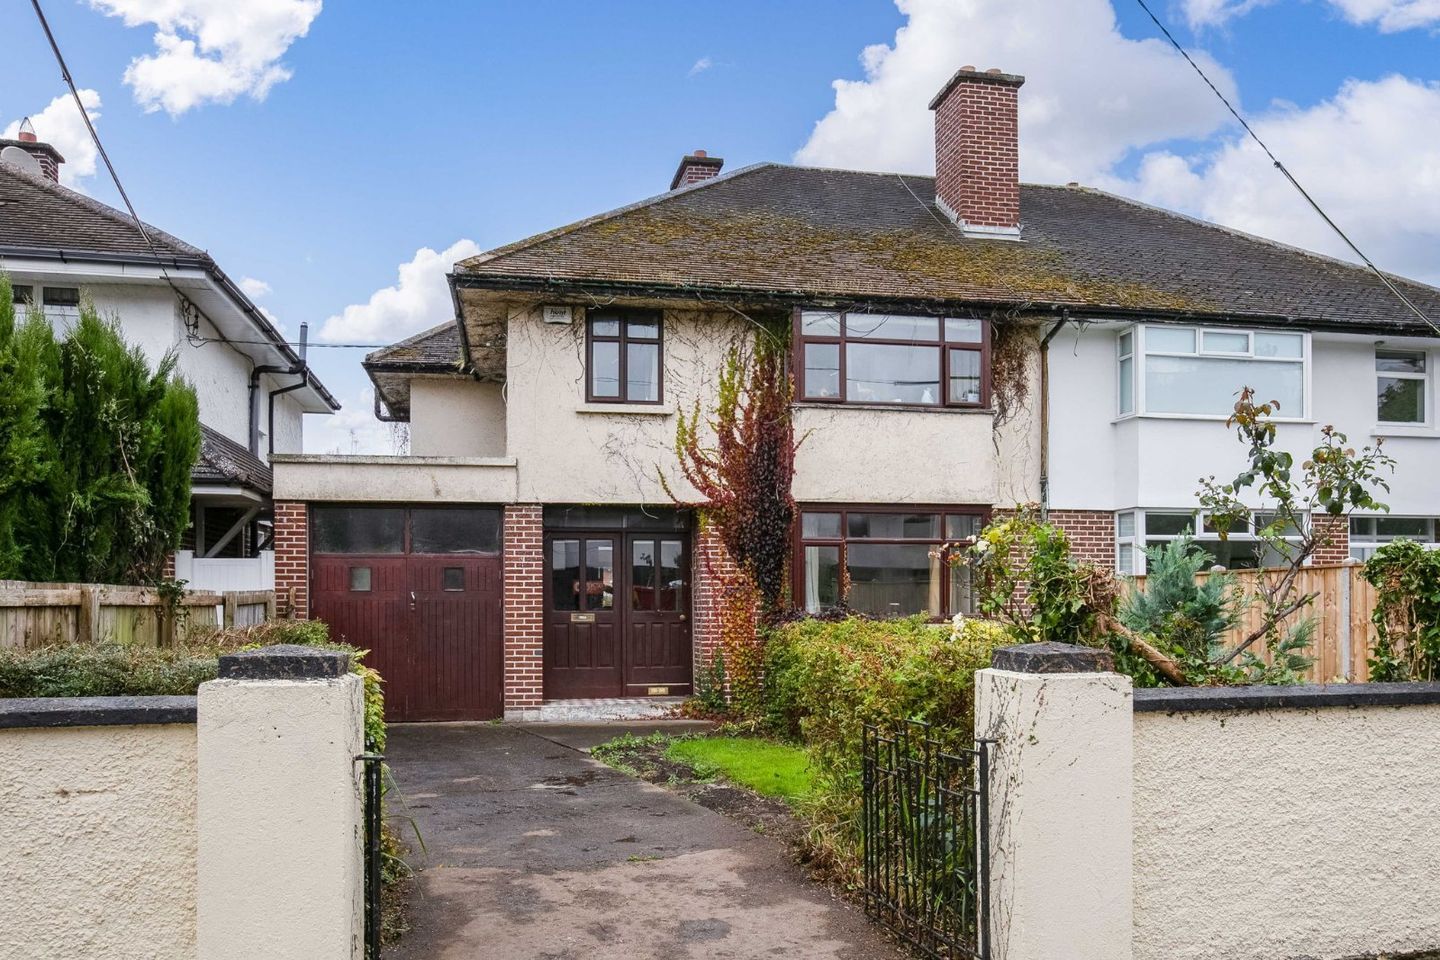 13 Booterstown Park, Booterstown, Blackrock, Co. Dublin, A94A7Y3